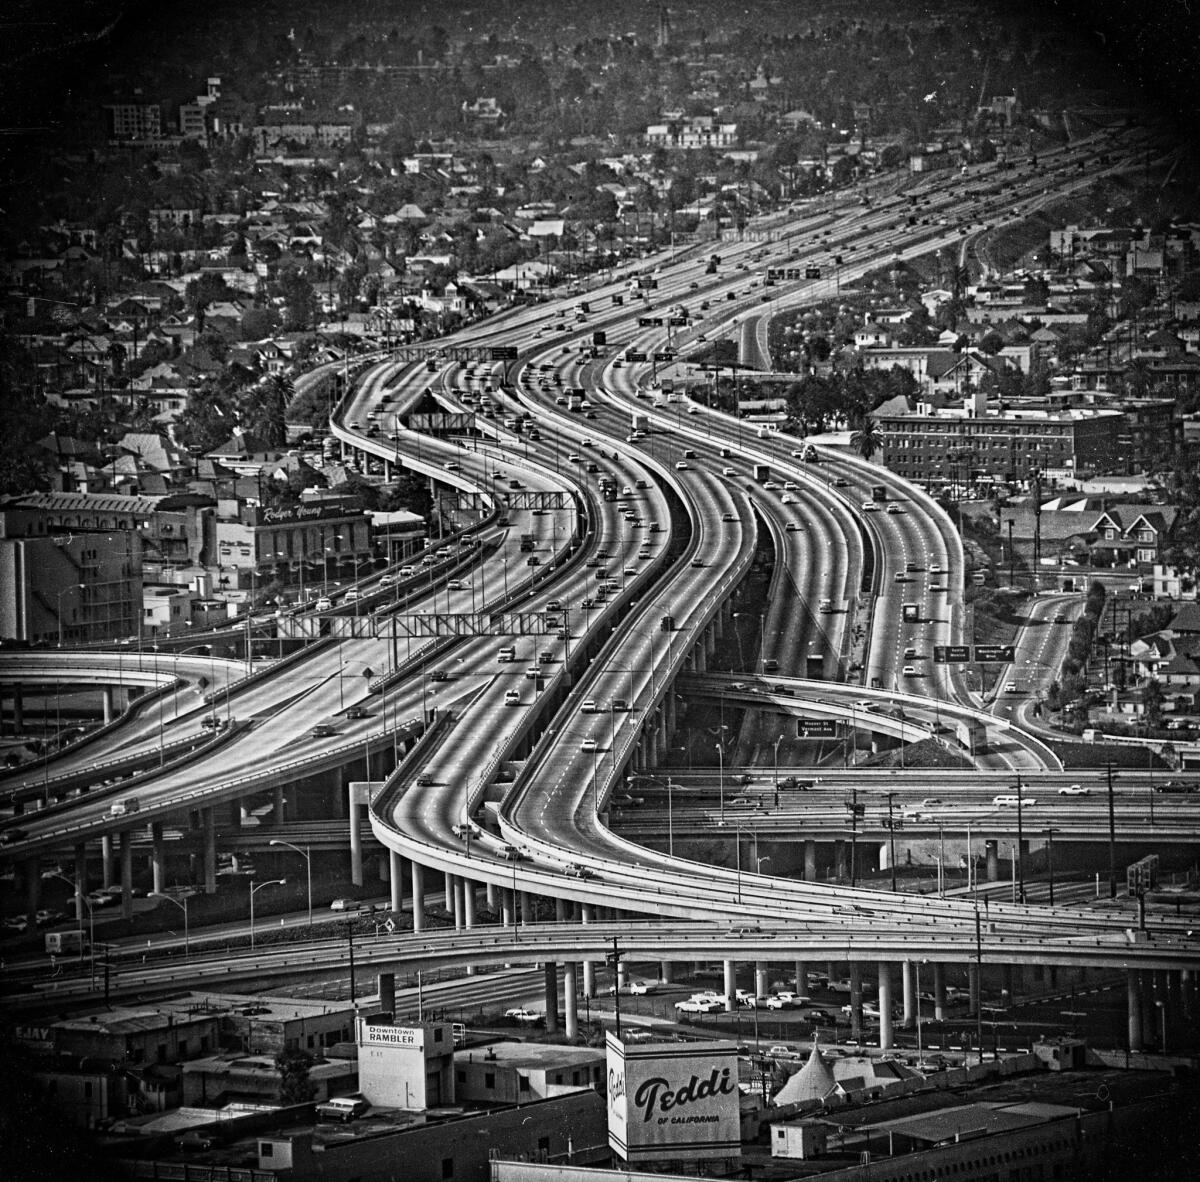 Each chapter of Peter Lunenfeld's "City at the Edge of Forever" begins with a black-and-white photo of a freeway.